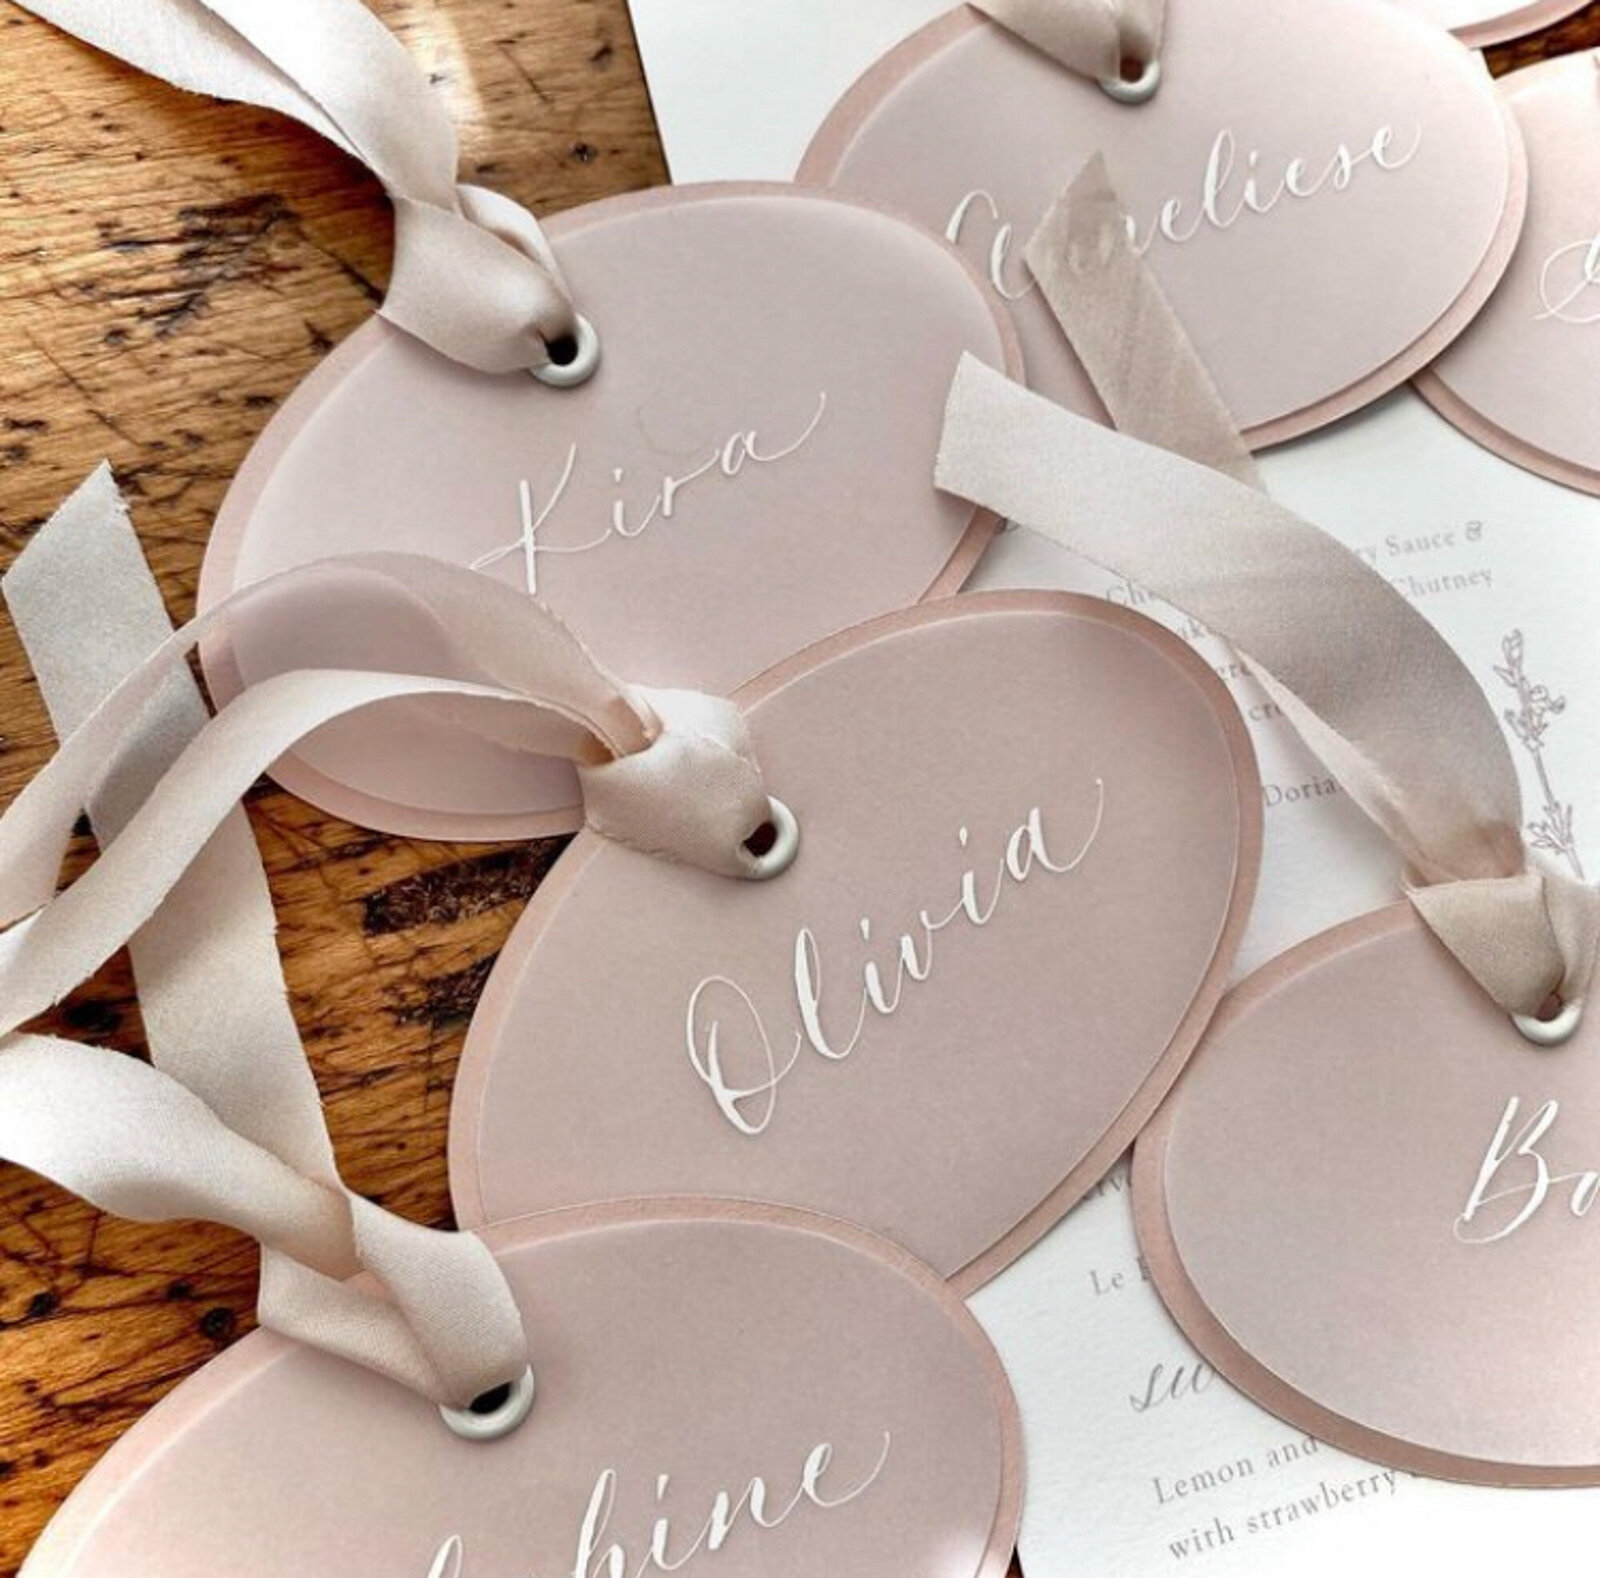 elegant place cards with custom calligraphy